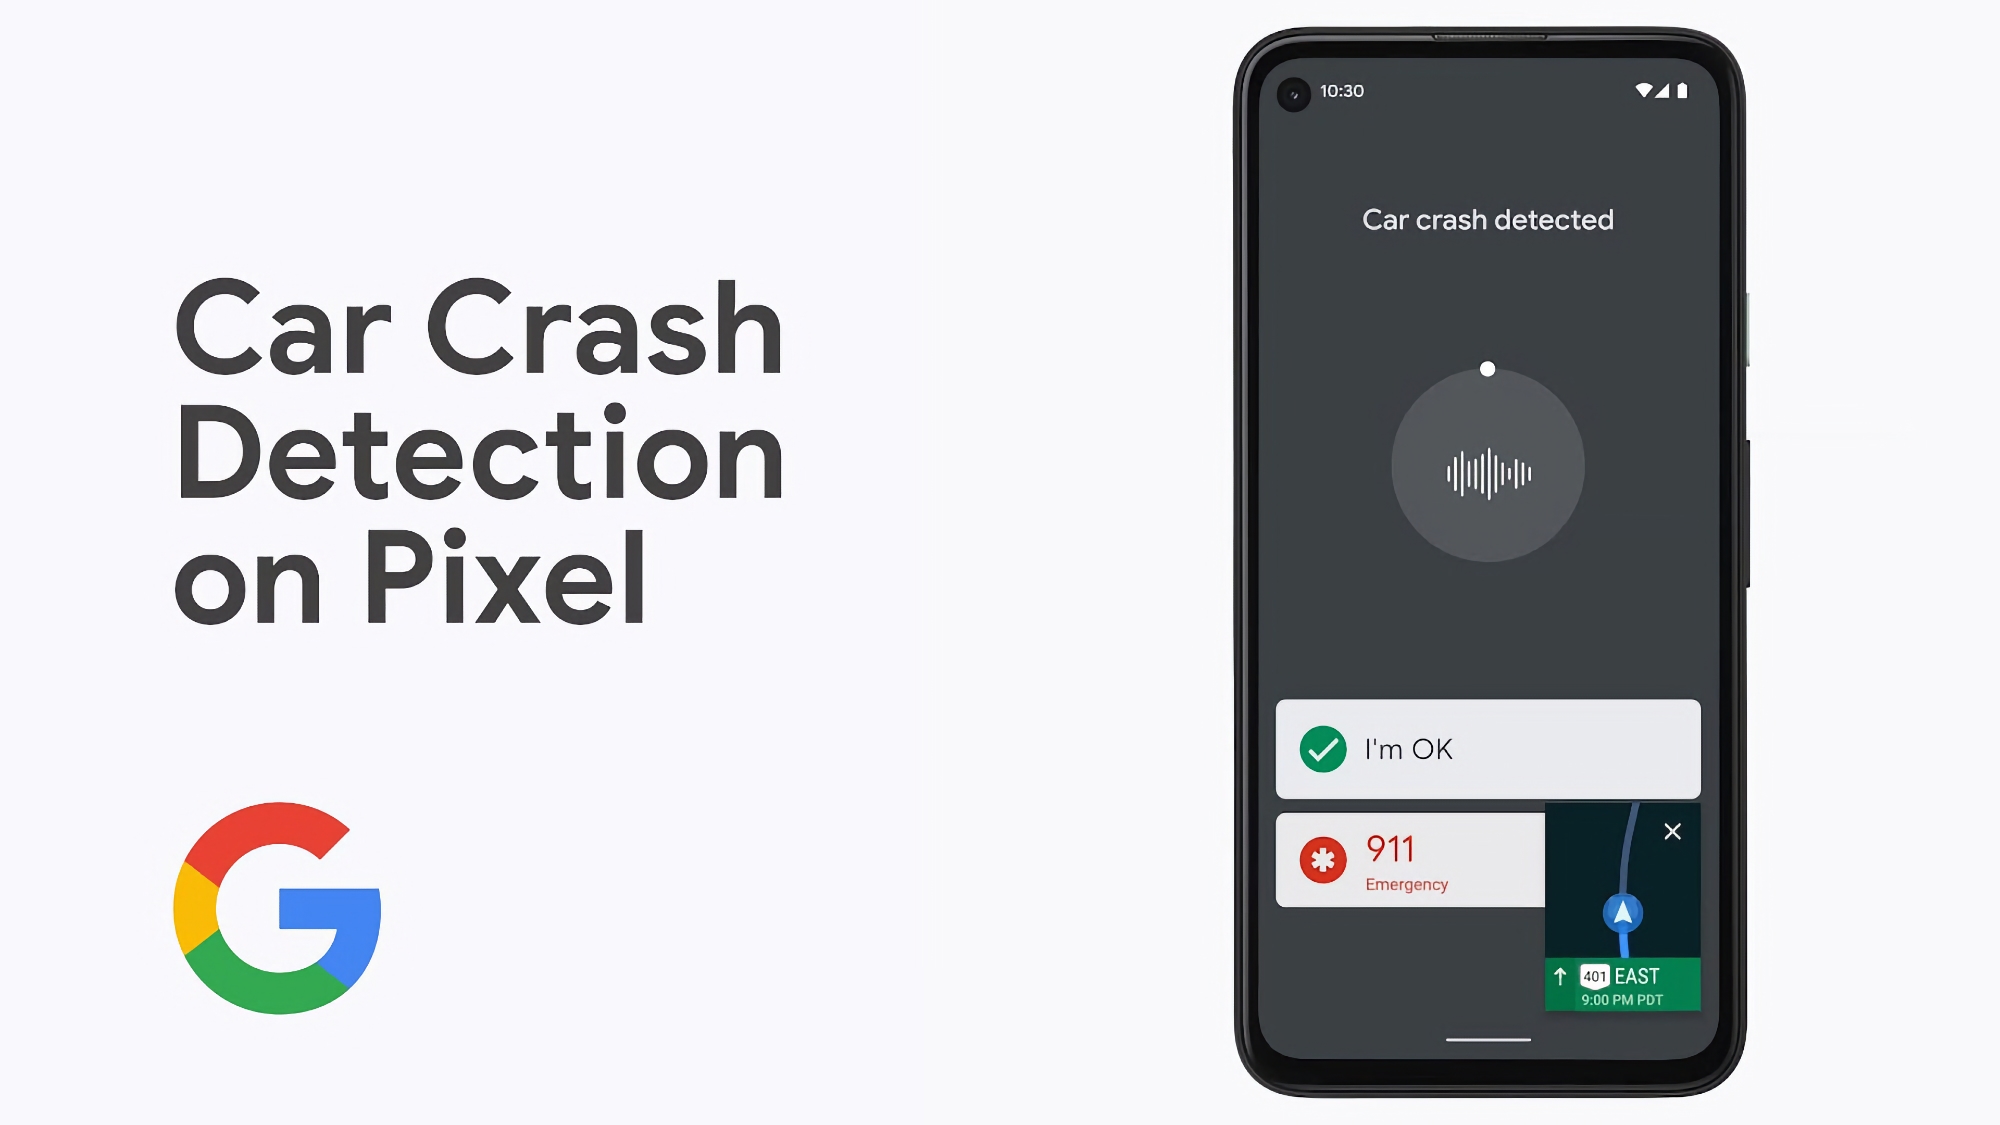 The Car Crash Detection feature on Google Pixel smartphones has arrived in five new countries